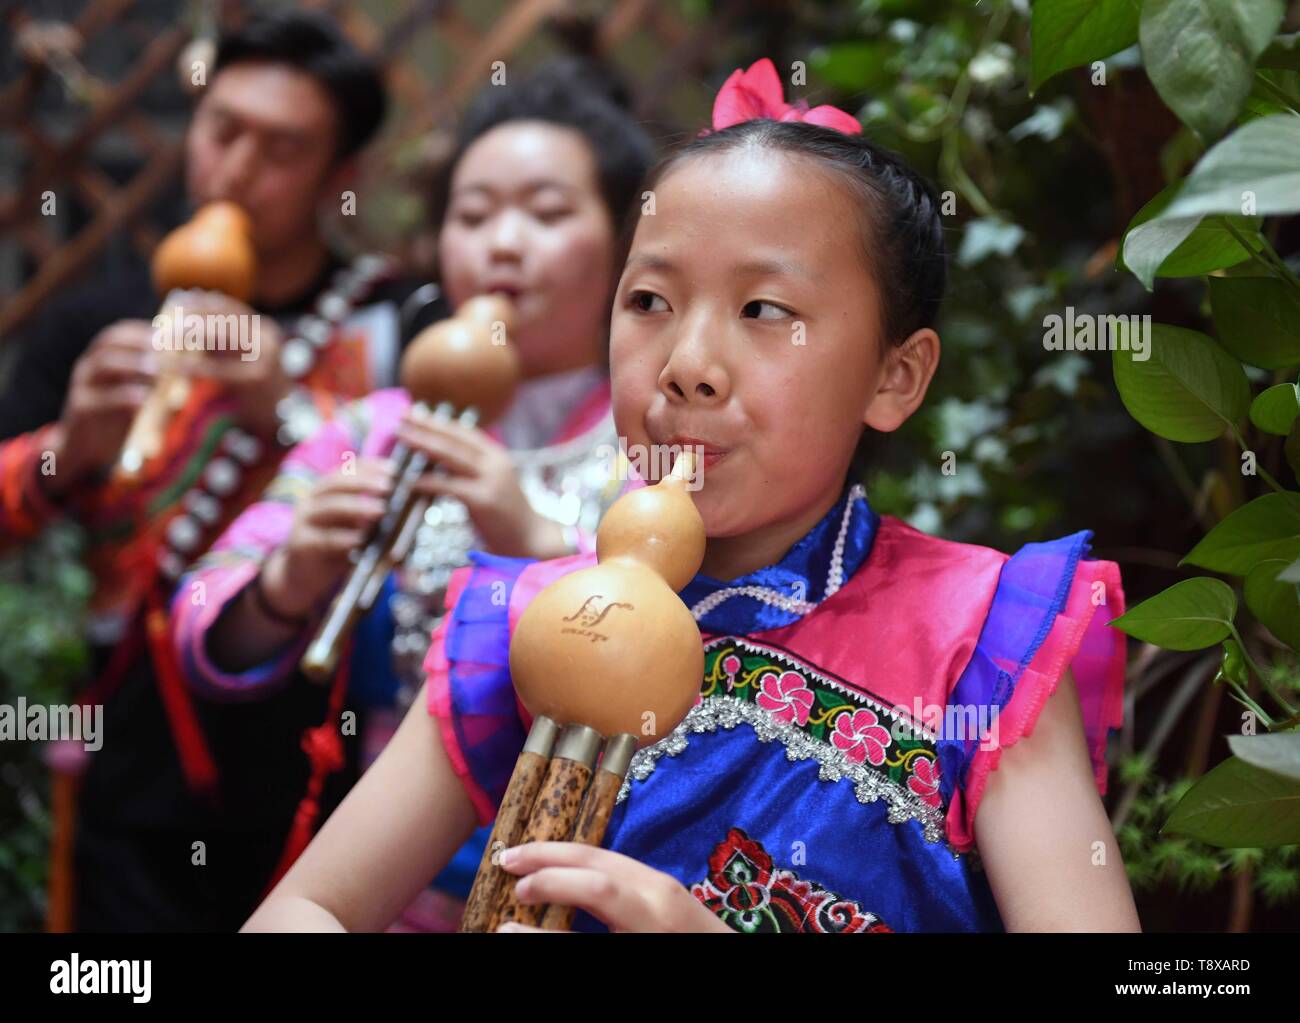 (190515) -- QUJING, May 15, 2019 (Xinhua) -- Students play the Hulusi at an art school at Qujing, southwest China's Yunnan Province, May 11, 2019. Hulusi is a free-reed wind instrument from China. It is made of a gourd with three bamboo pipes inserted into the bottom end of the gourd wind chest. The bamboo pipes consist of one main pipe which has finger holes for making different tones and two drone pipes which can play chord. It is mainly used by minority ethnic groups in Yunnan province and it has a clarinet-like sound. (Xinhua/Yang Zongyou) Stock Photo